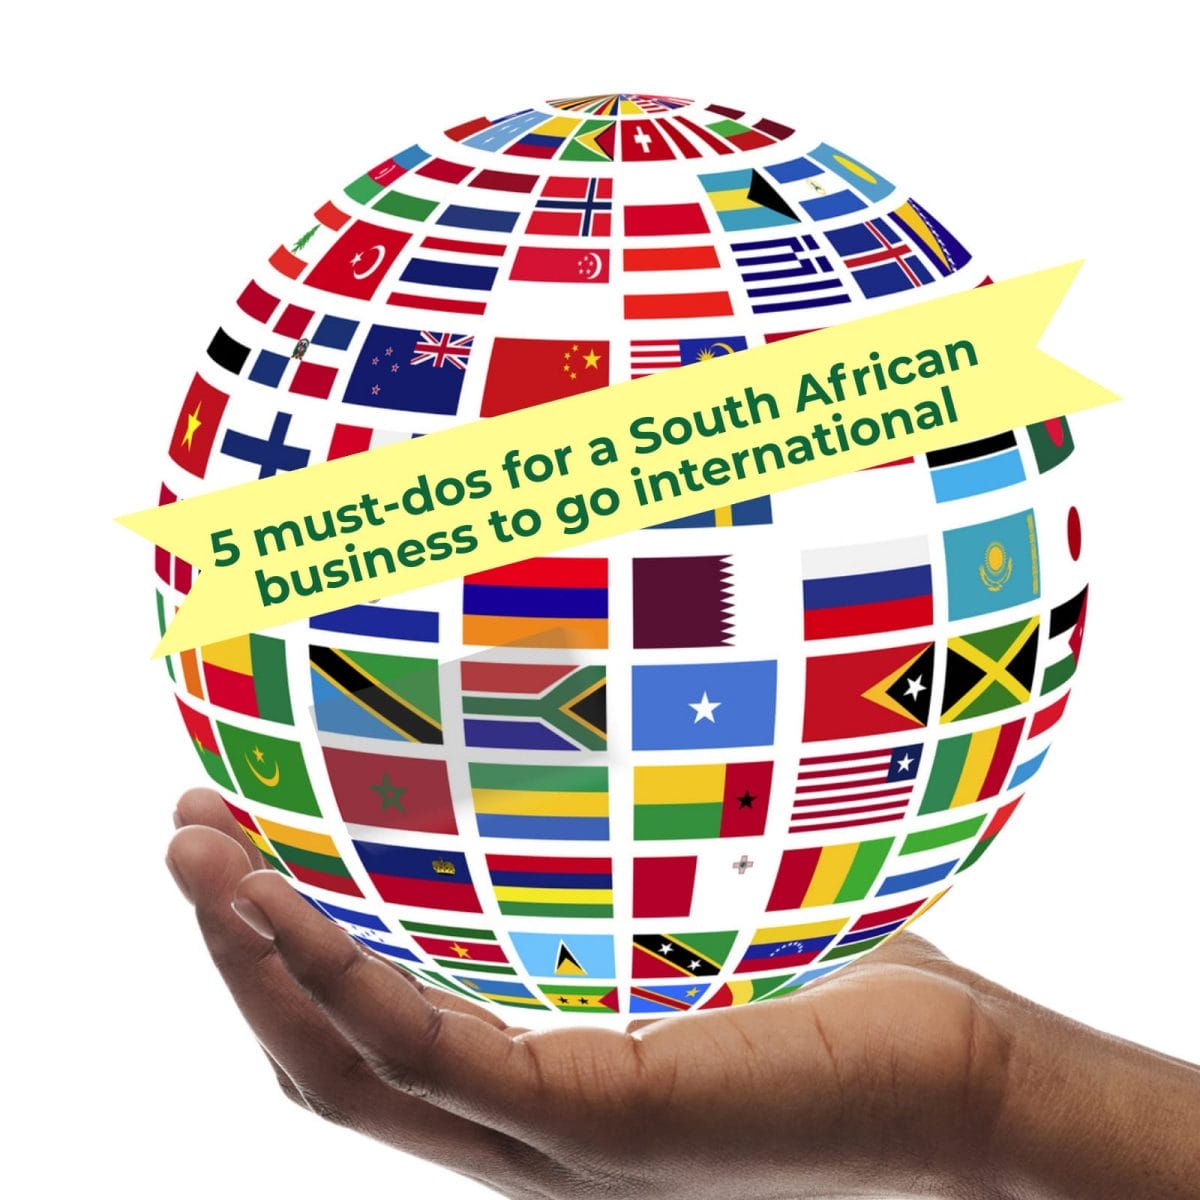 5 must-dos for a South African business to go international